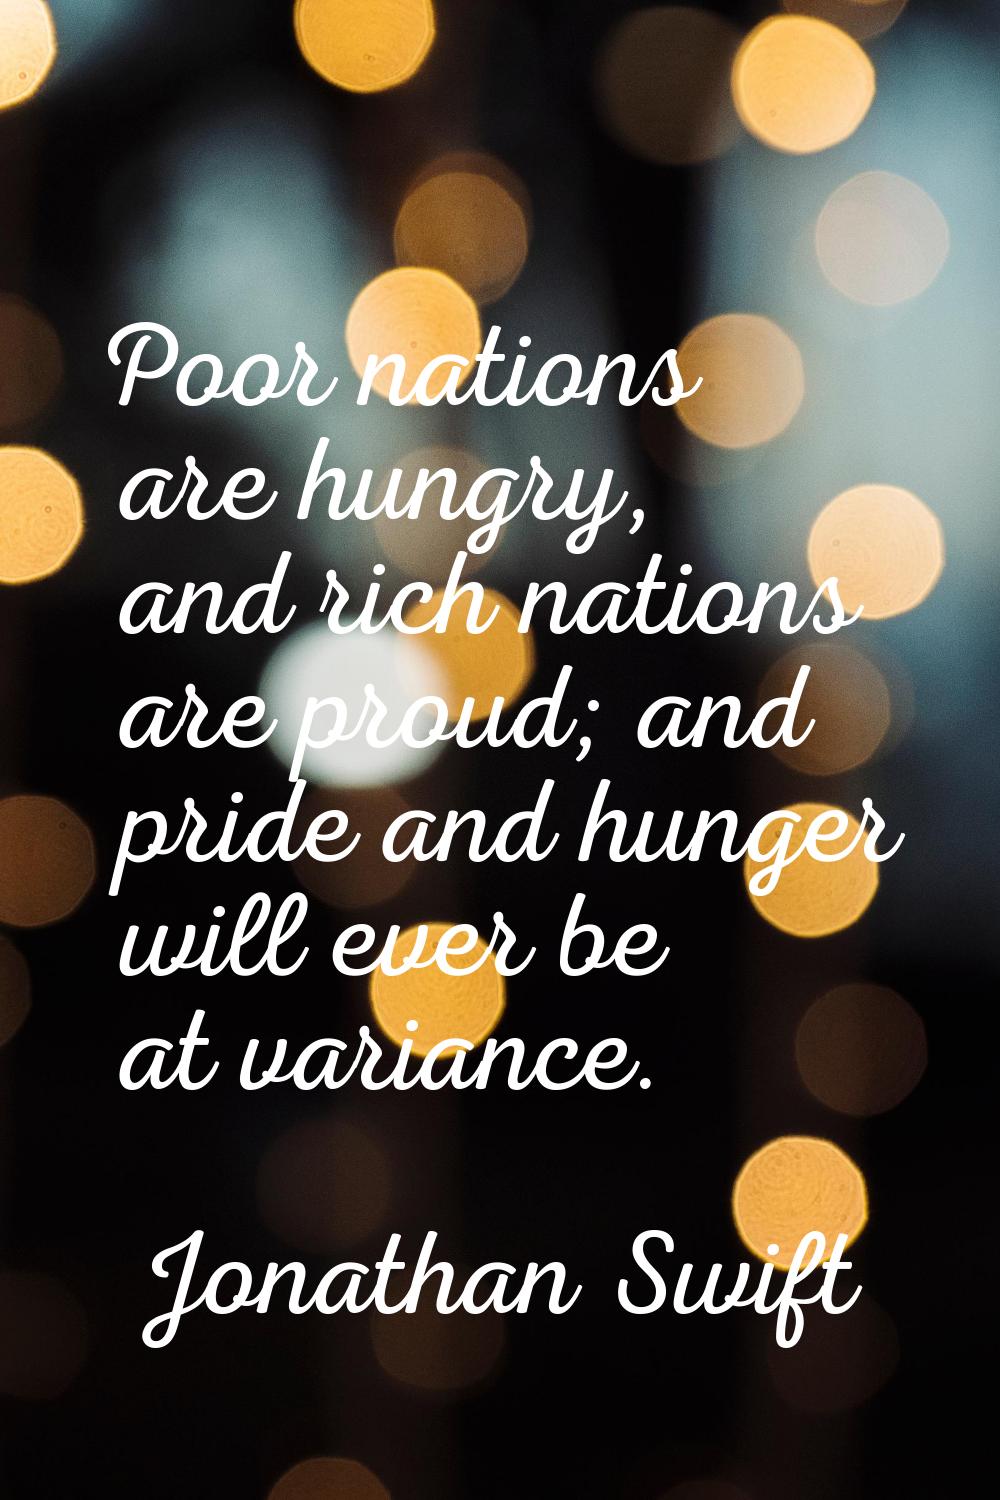 Poor nations are hungry, and rich nations are proud; and pride and hunger will ever be at variance.